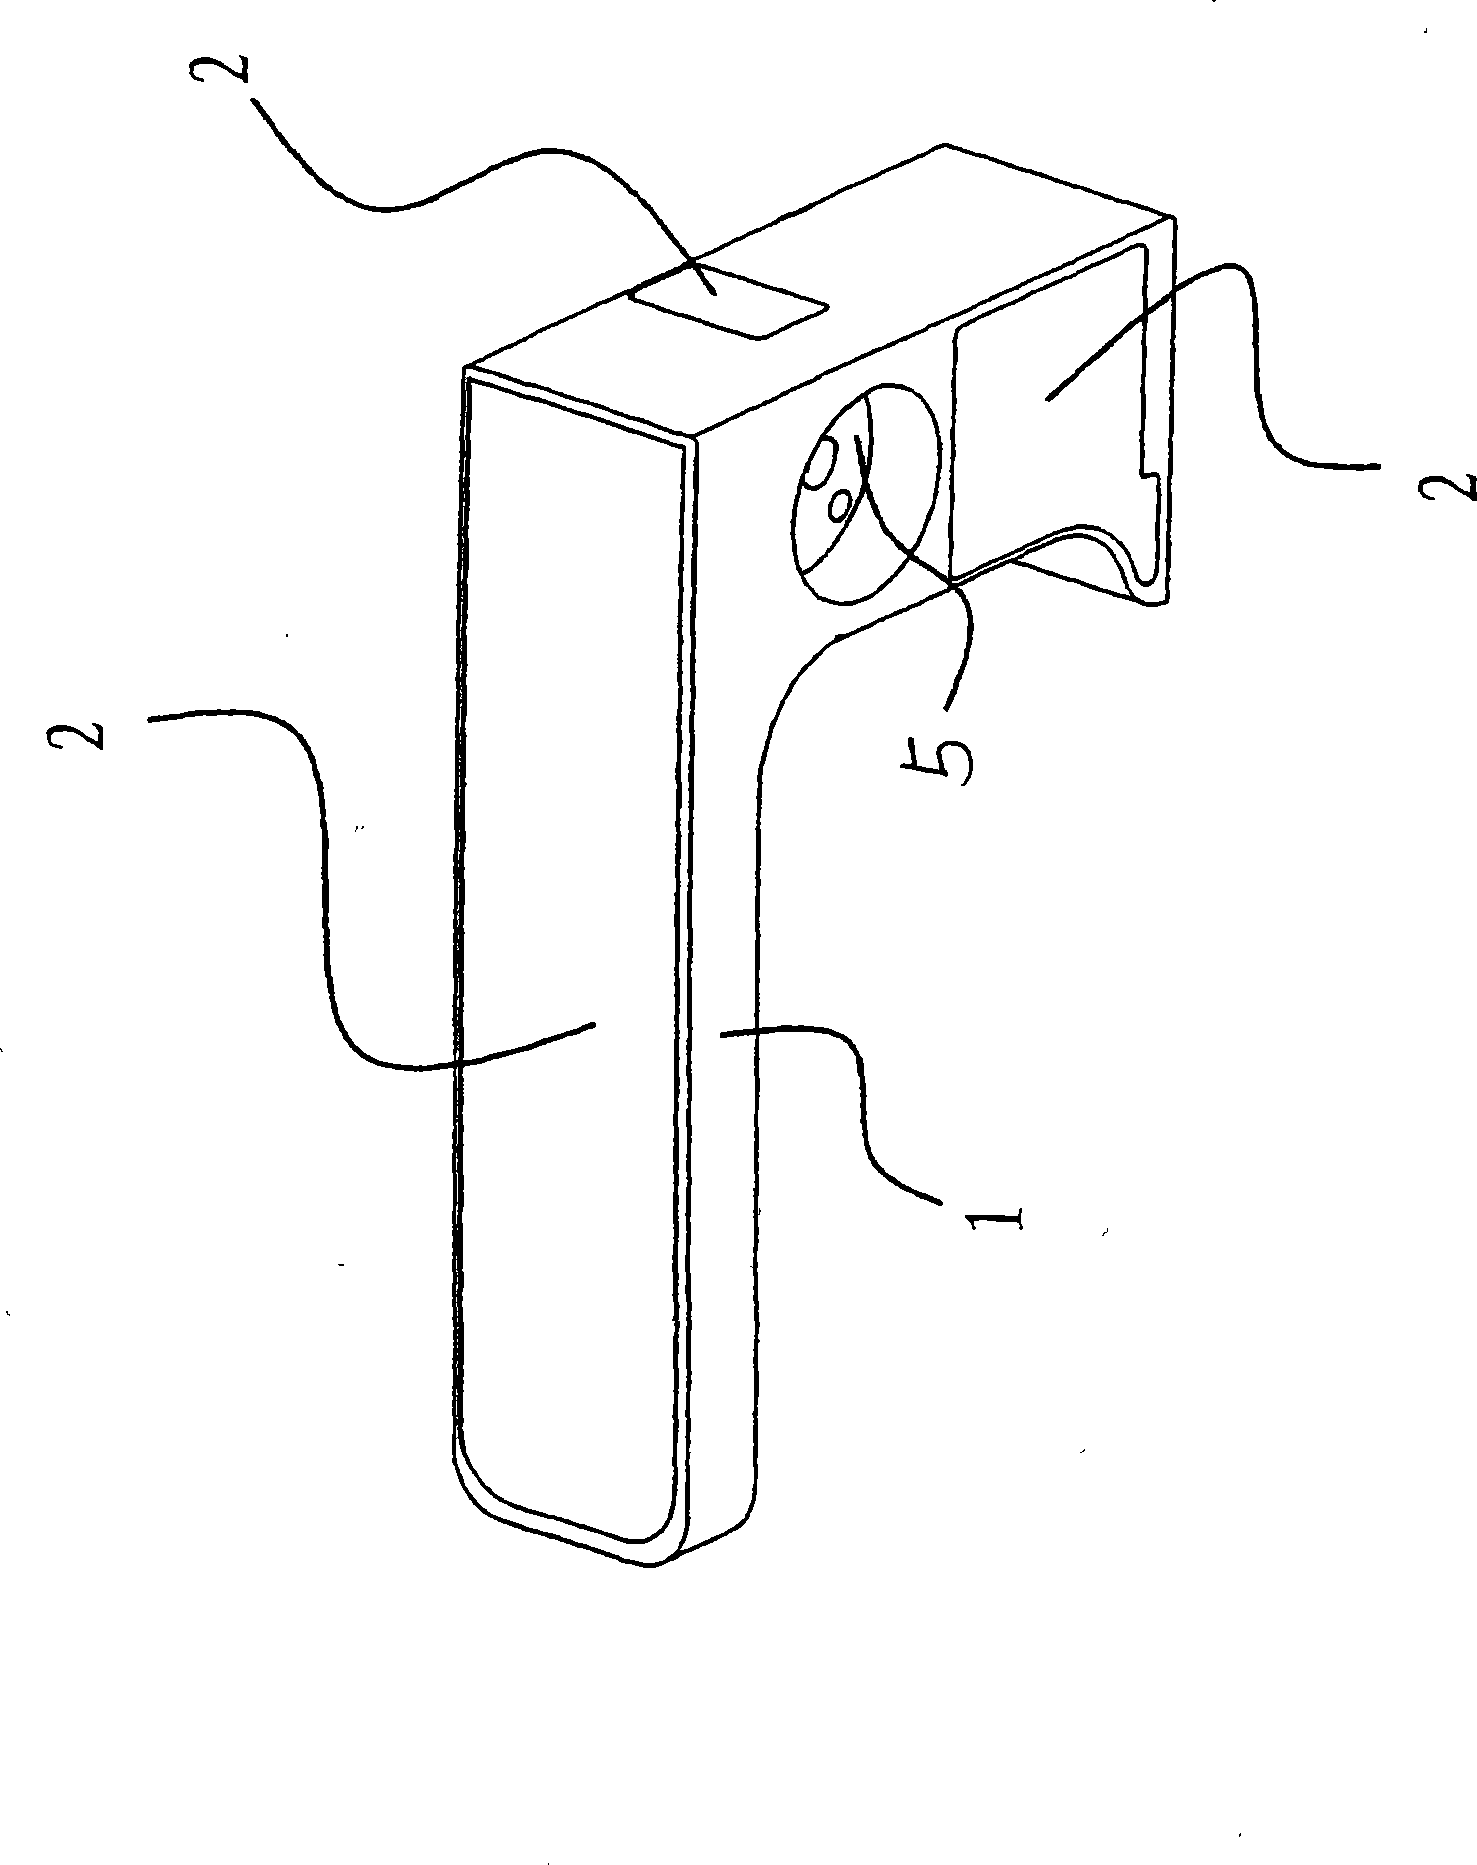 Method for producing stainless steel tap